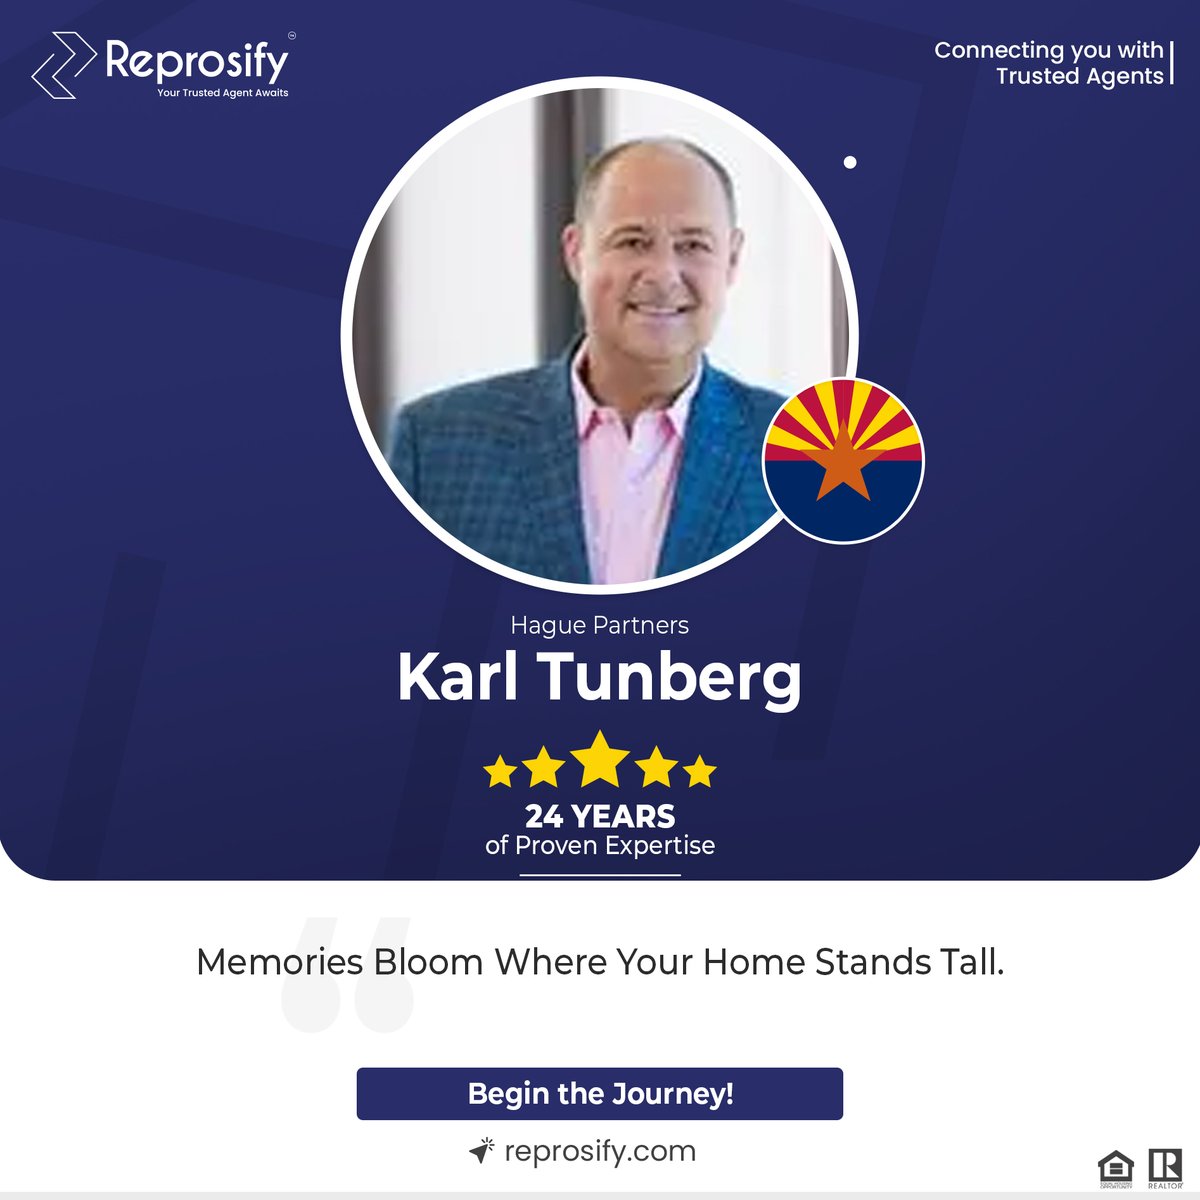 Embark on a journey to opulent living with Karl Tunberg in Arizona. Your dream oasis awaits – reach out now!

👤agents.reprosify.com/karl-tunberg
 
#Reprosify #AgentsReprosify #HaguePartners #KarlTunberg #realestate #realtor #Broker #Arizonarealestate #Temperealestate